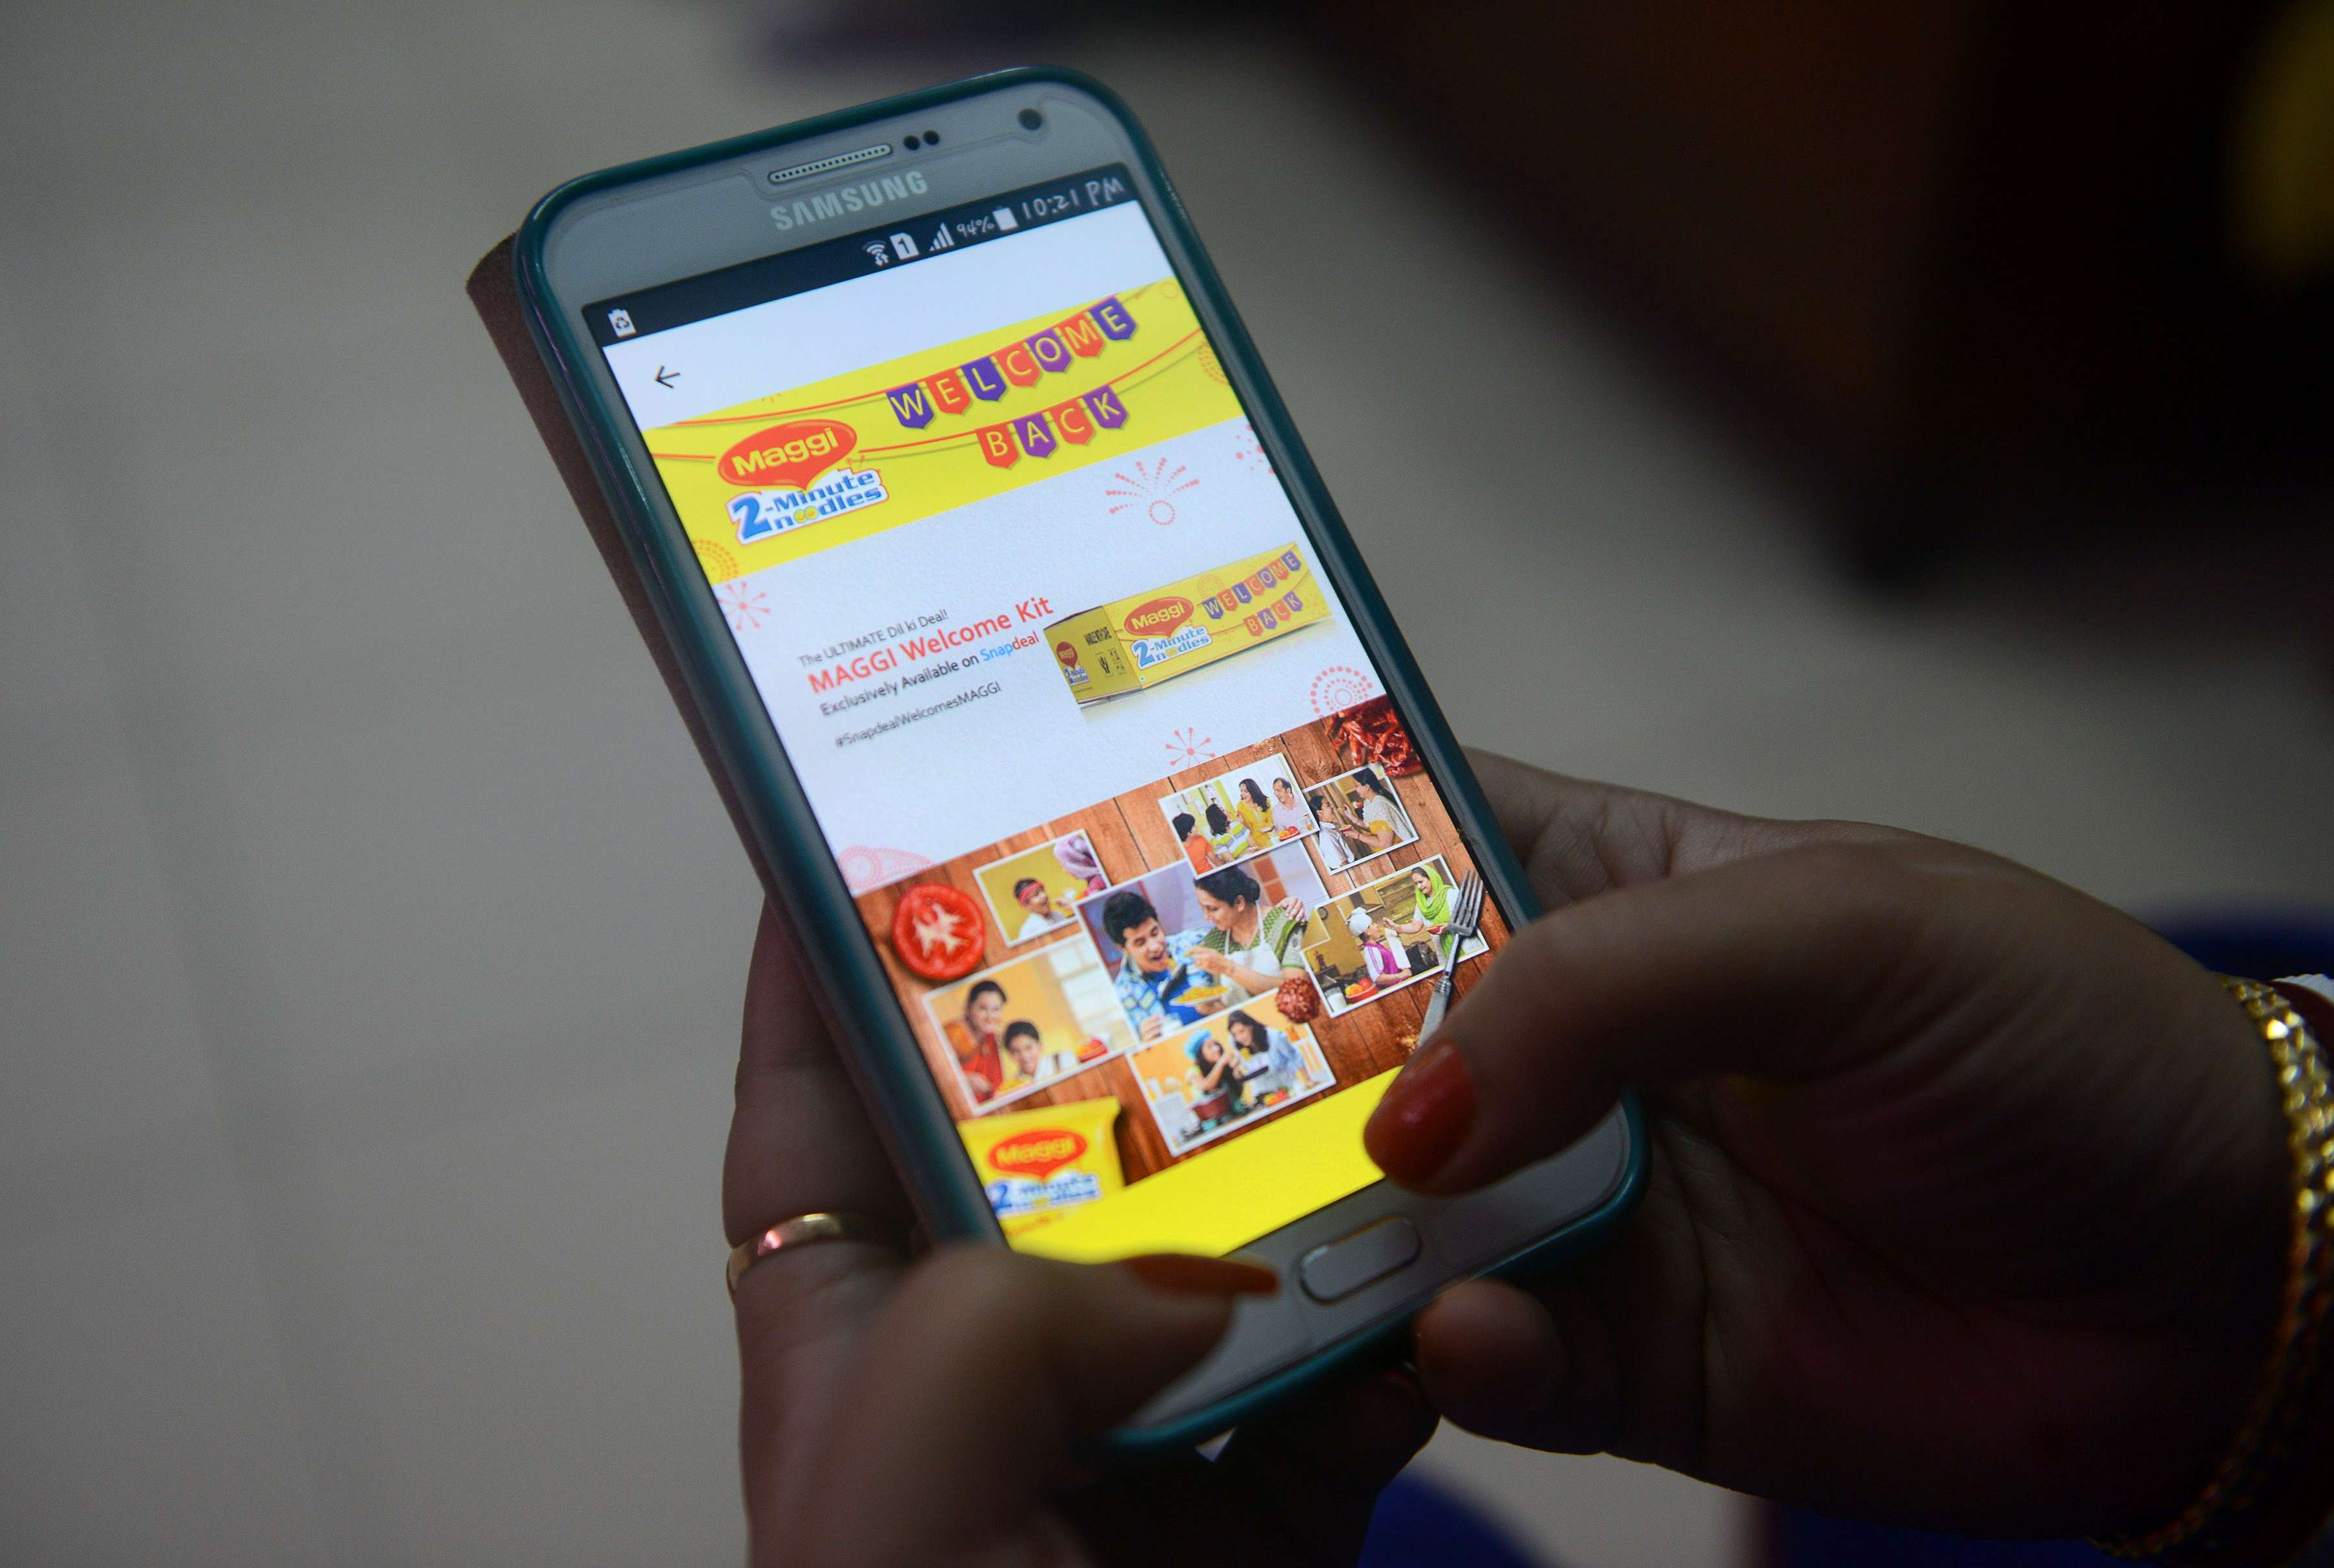 A woman registers on the e-commerce website Snapdeal for the Maggi Noodles 'Welcome Kit', in Siliguri. Snapdeal.com says it has raised US$500 million from investors including Alibaba and Foxconn. Photo: AFP